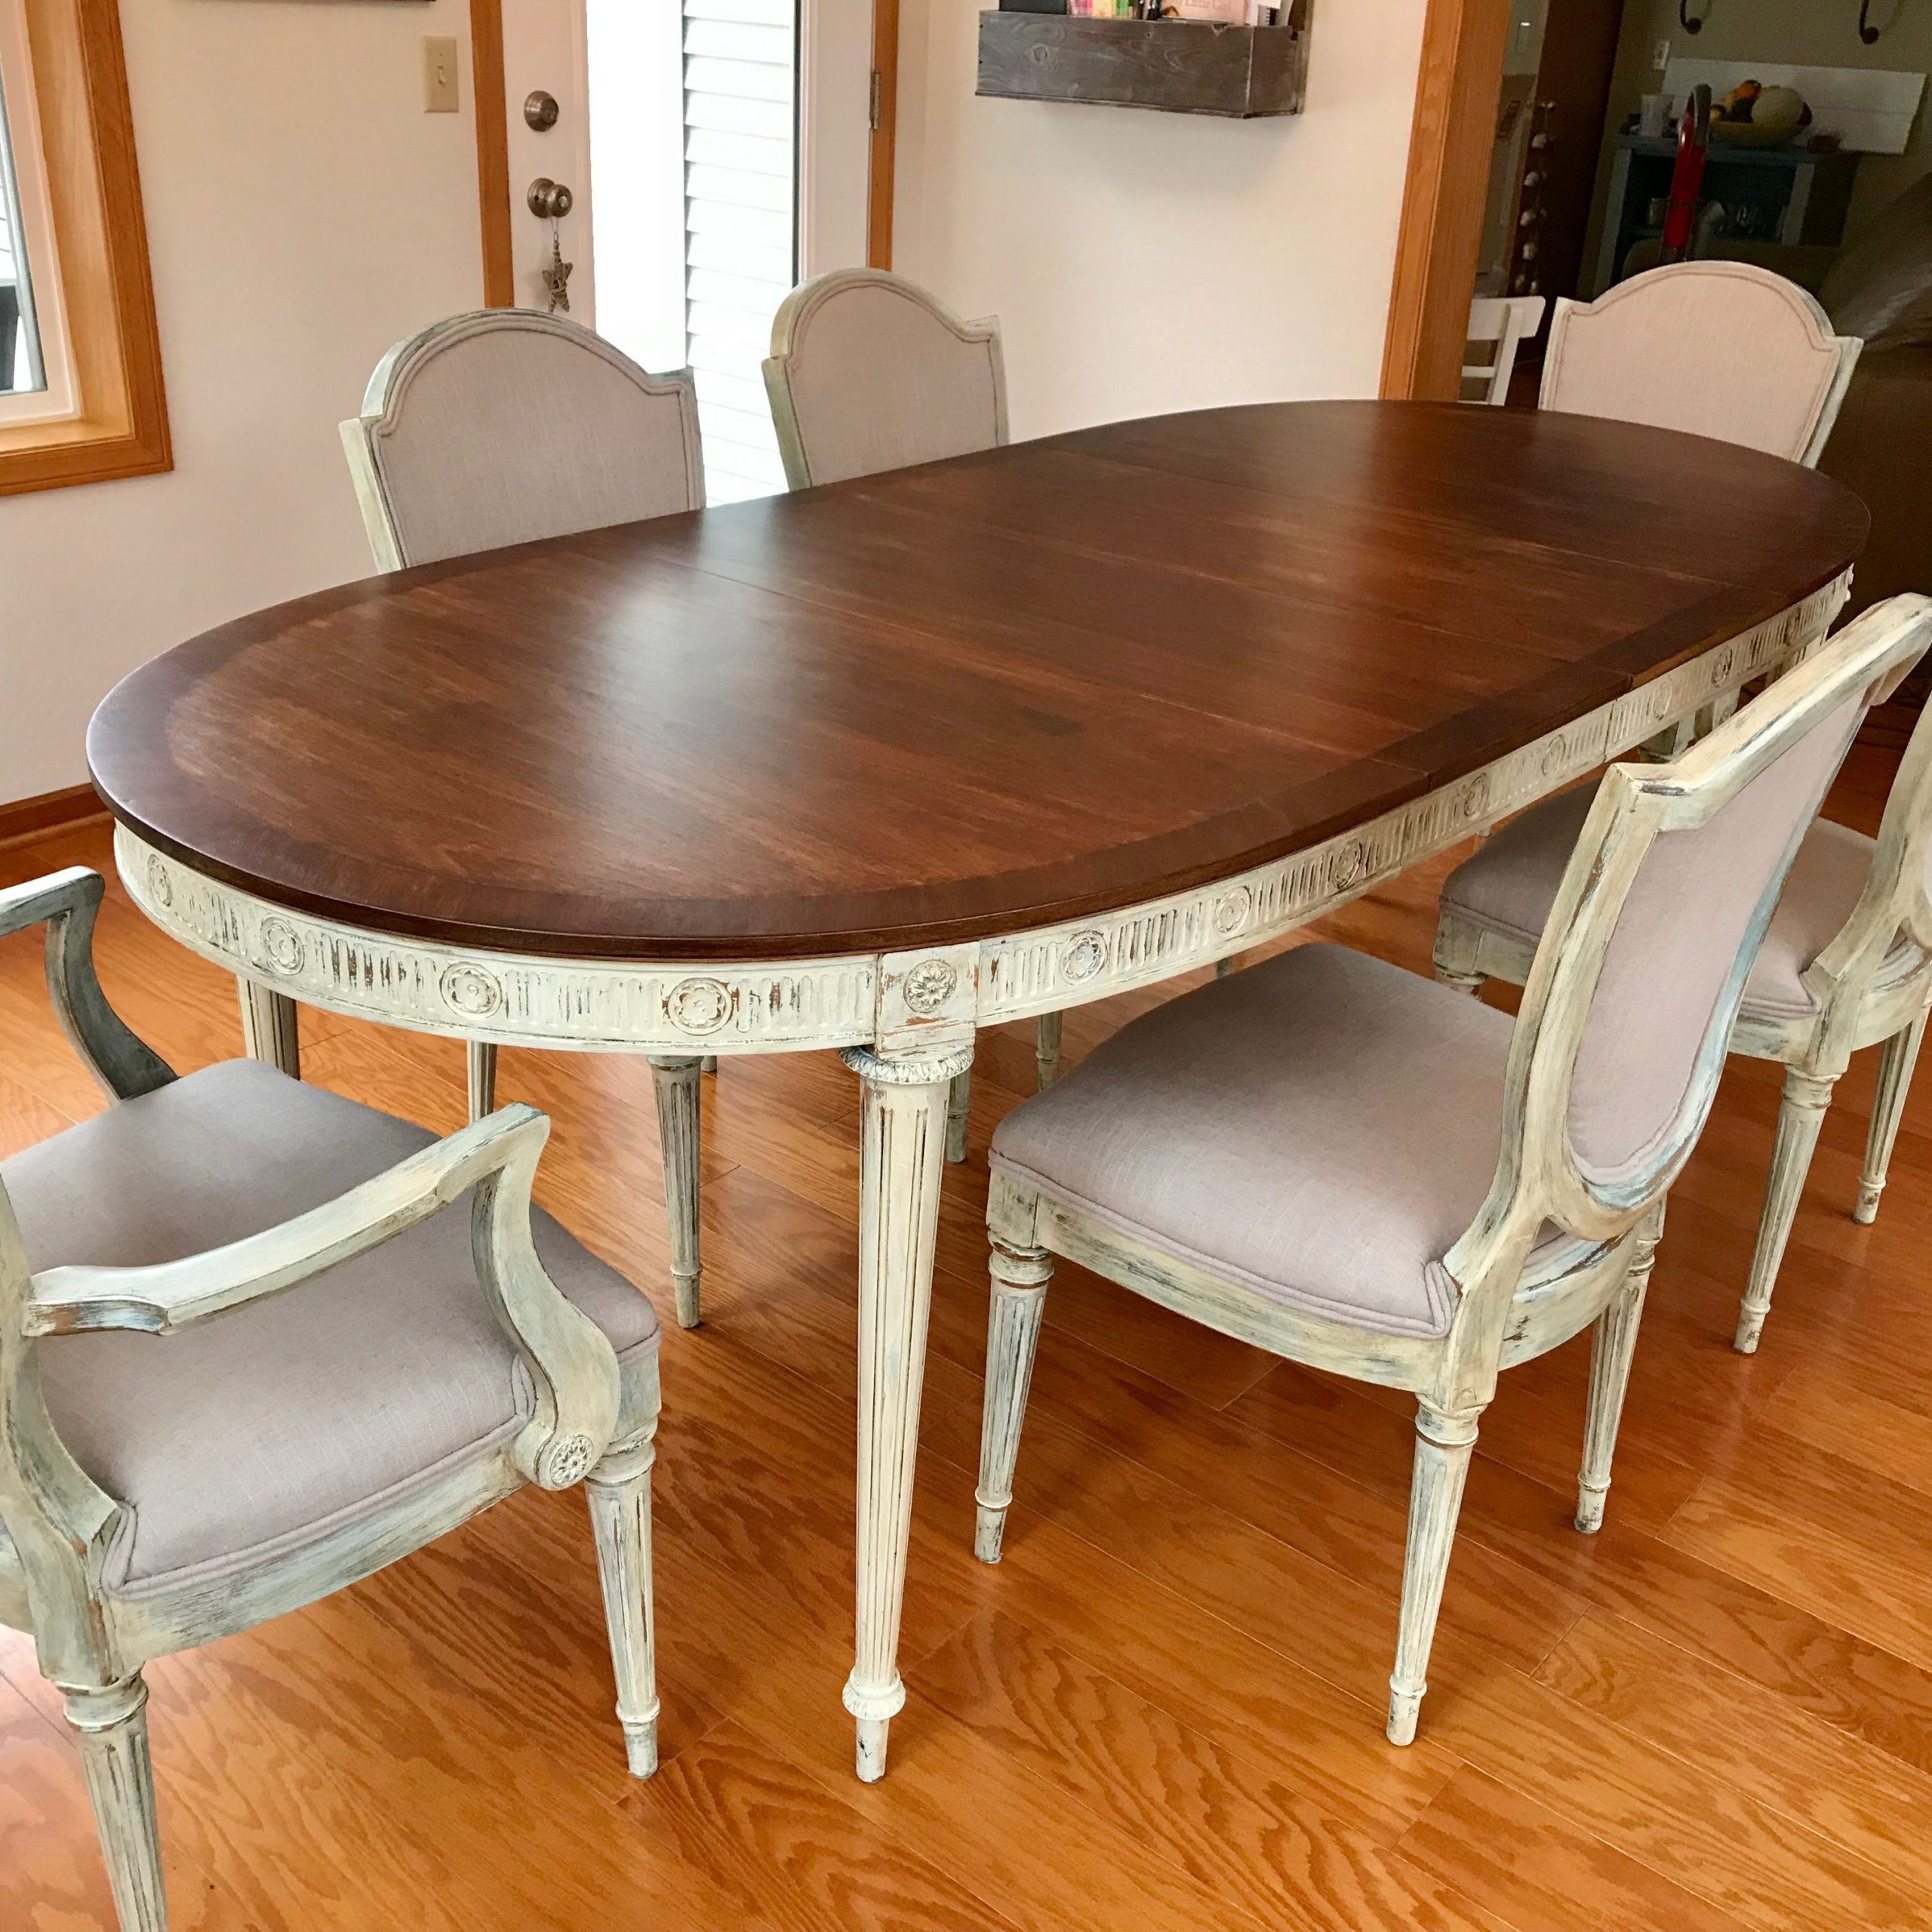 Dining Table | Solid Wood | Dyed Hickory Top | Chalk Paint Pertaining To Most Popular Dark Oak Wood Dining Tables (View 4 of 15)